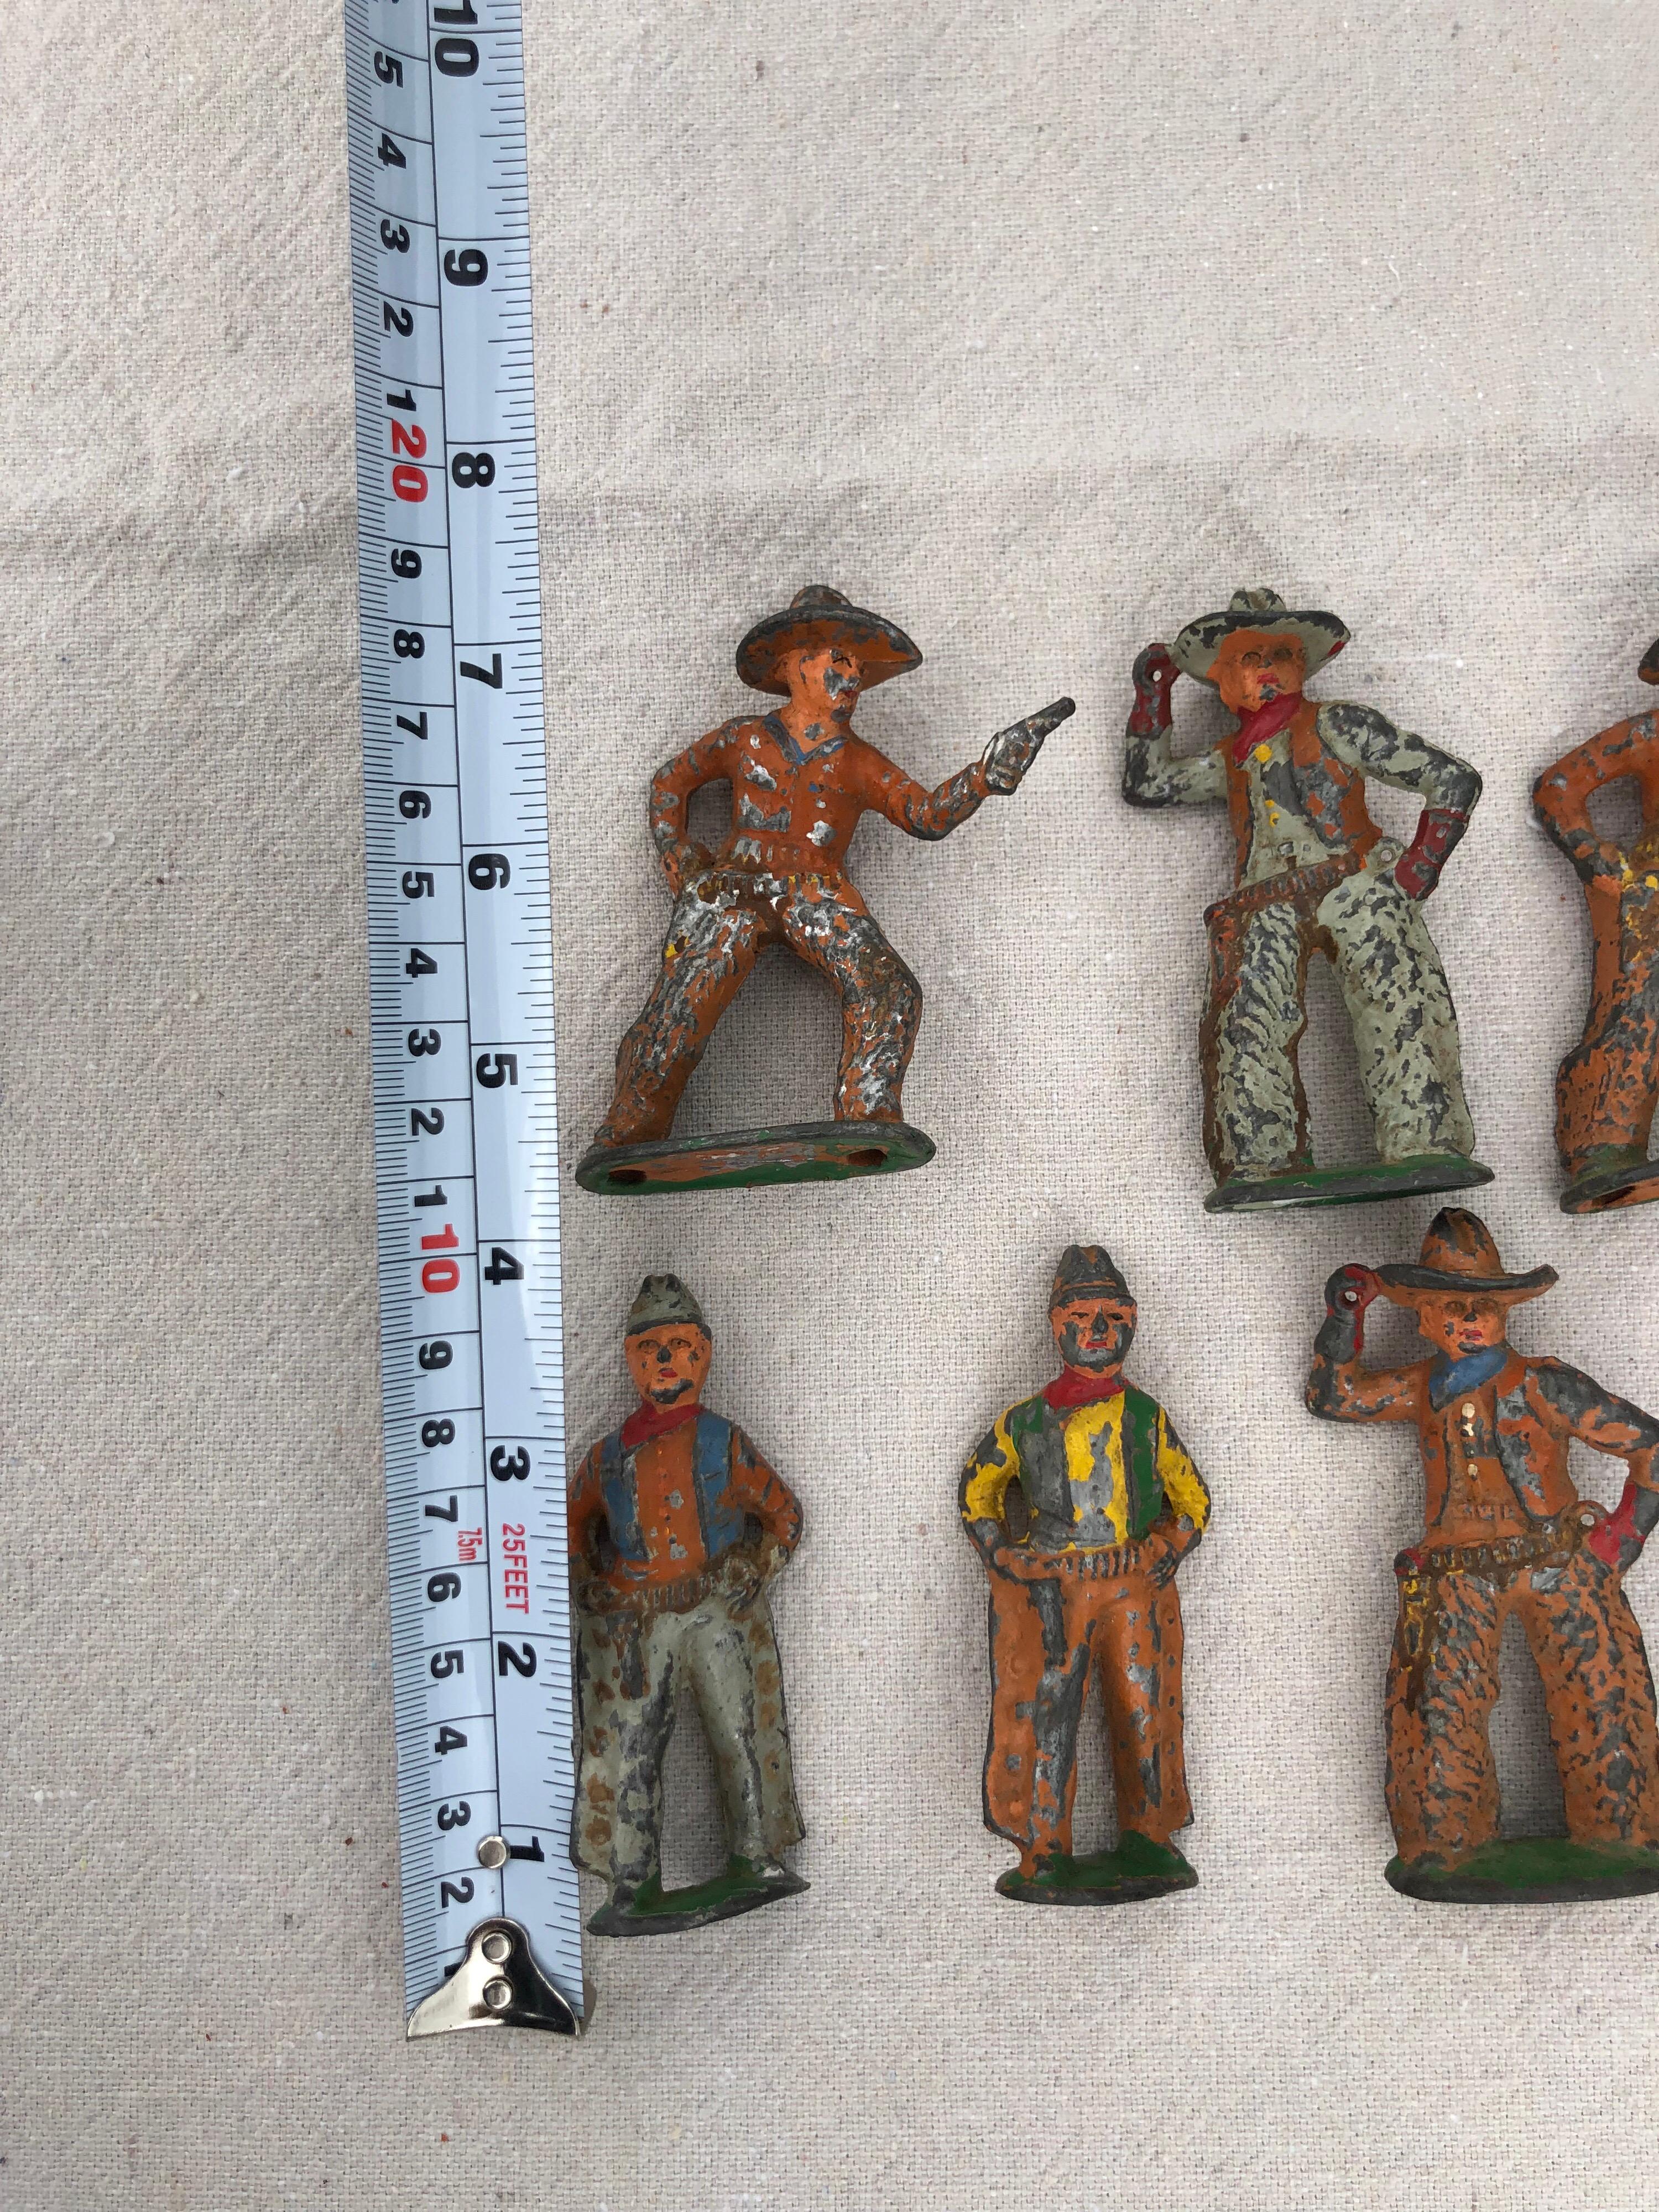 lead cowboy and indian figures